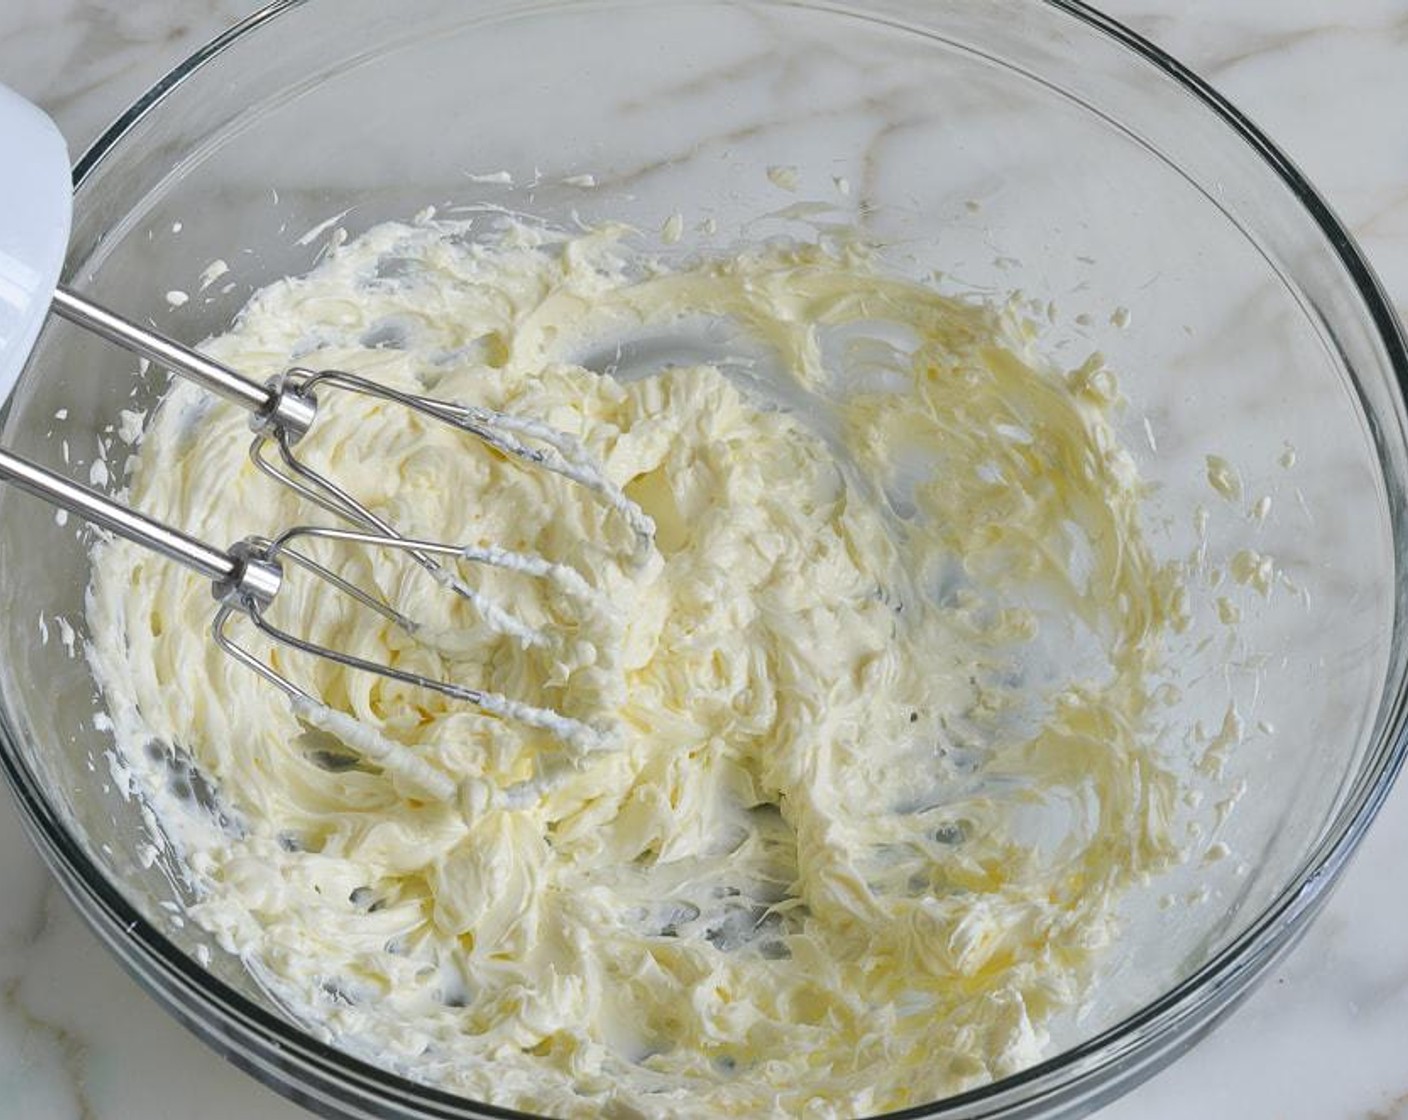 step 6 In the bowl of an electric mixer, beat the Philadelphia Original Soft Cheese (1 cup) until light and creamy, about 1 minute.